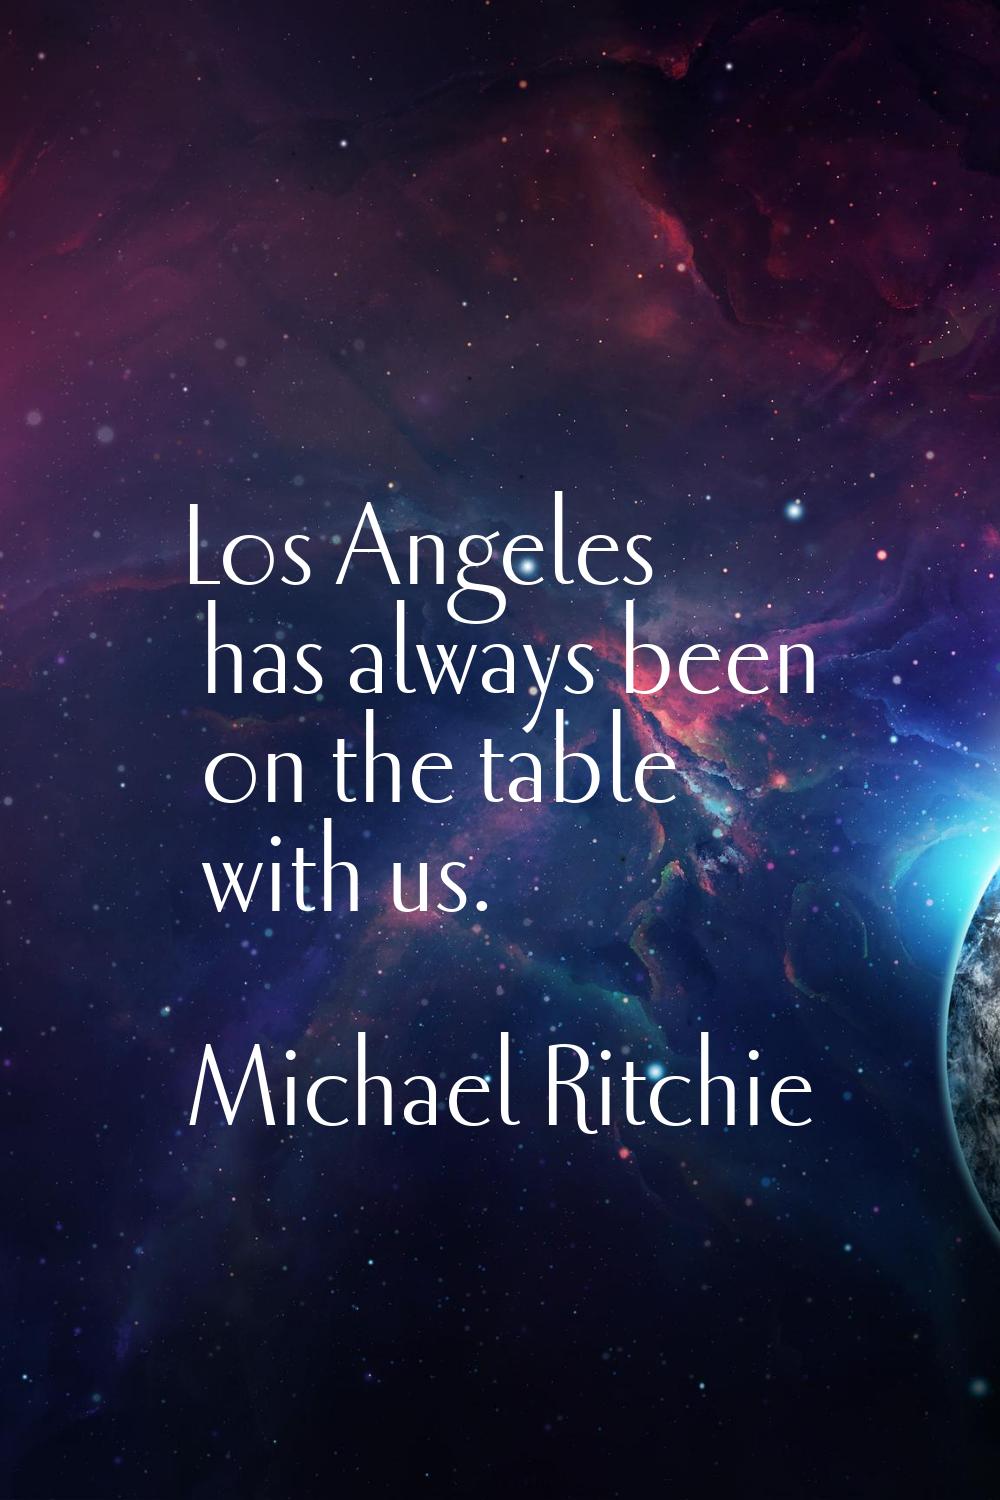 Los Angeles has always been on the table with us.